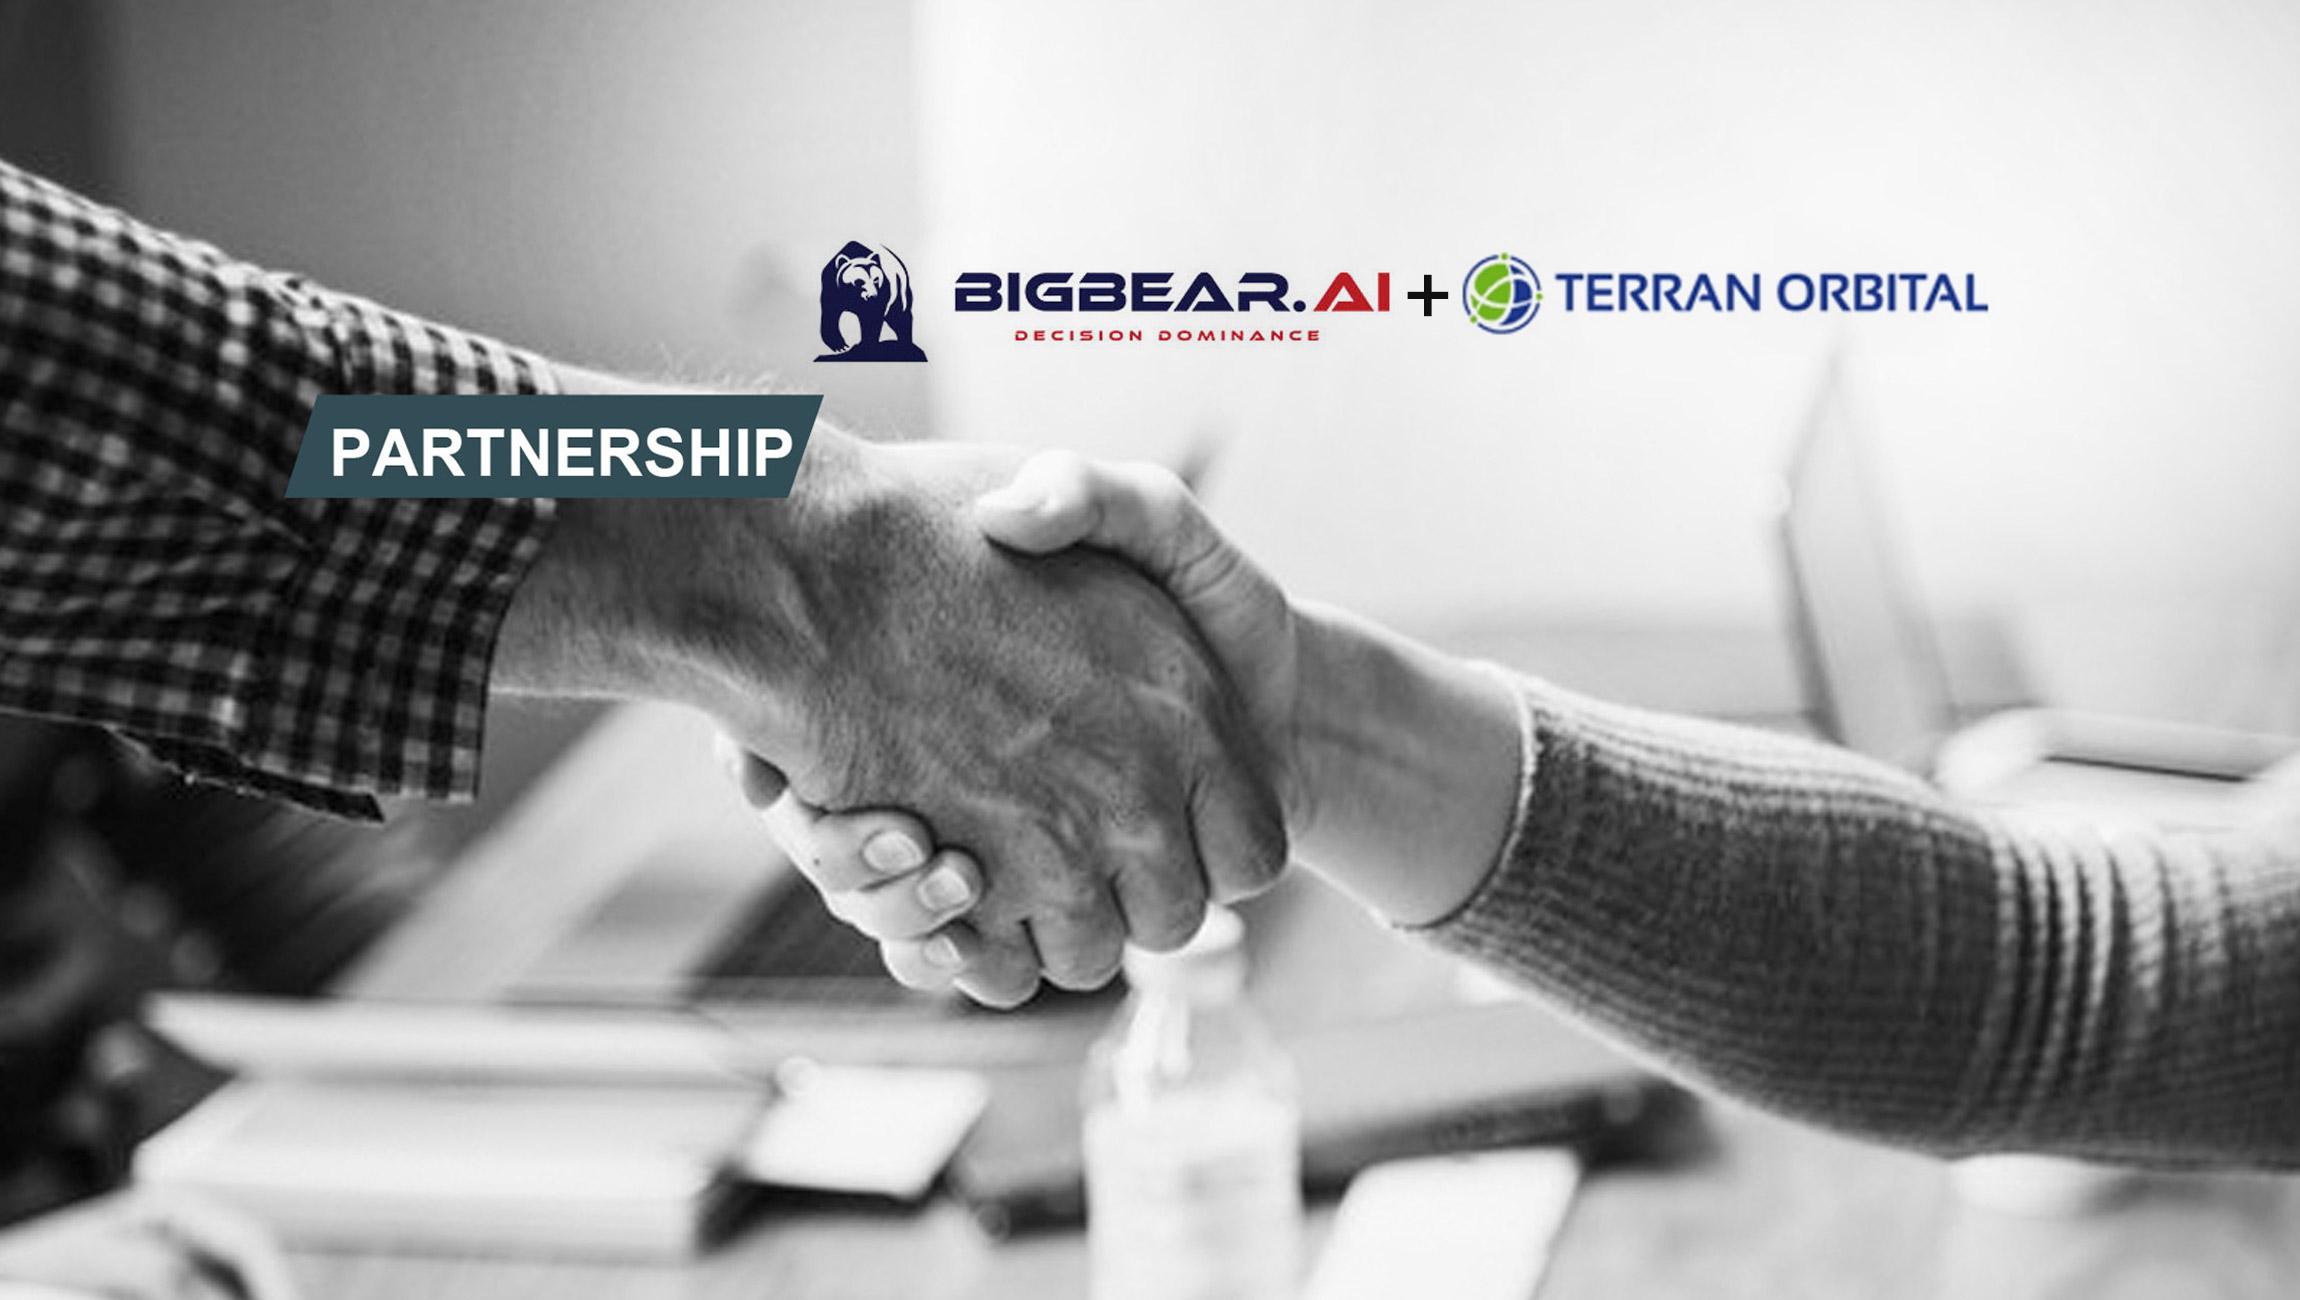 BigBear.ai Enters into Commercial Partnership with Terran Orbital to Support Satellite Constellation Manufacturing and Operations